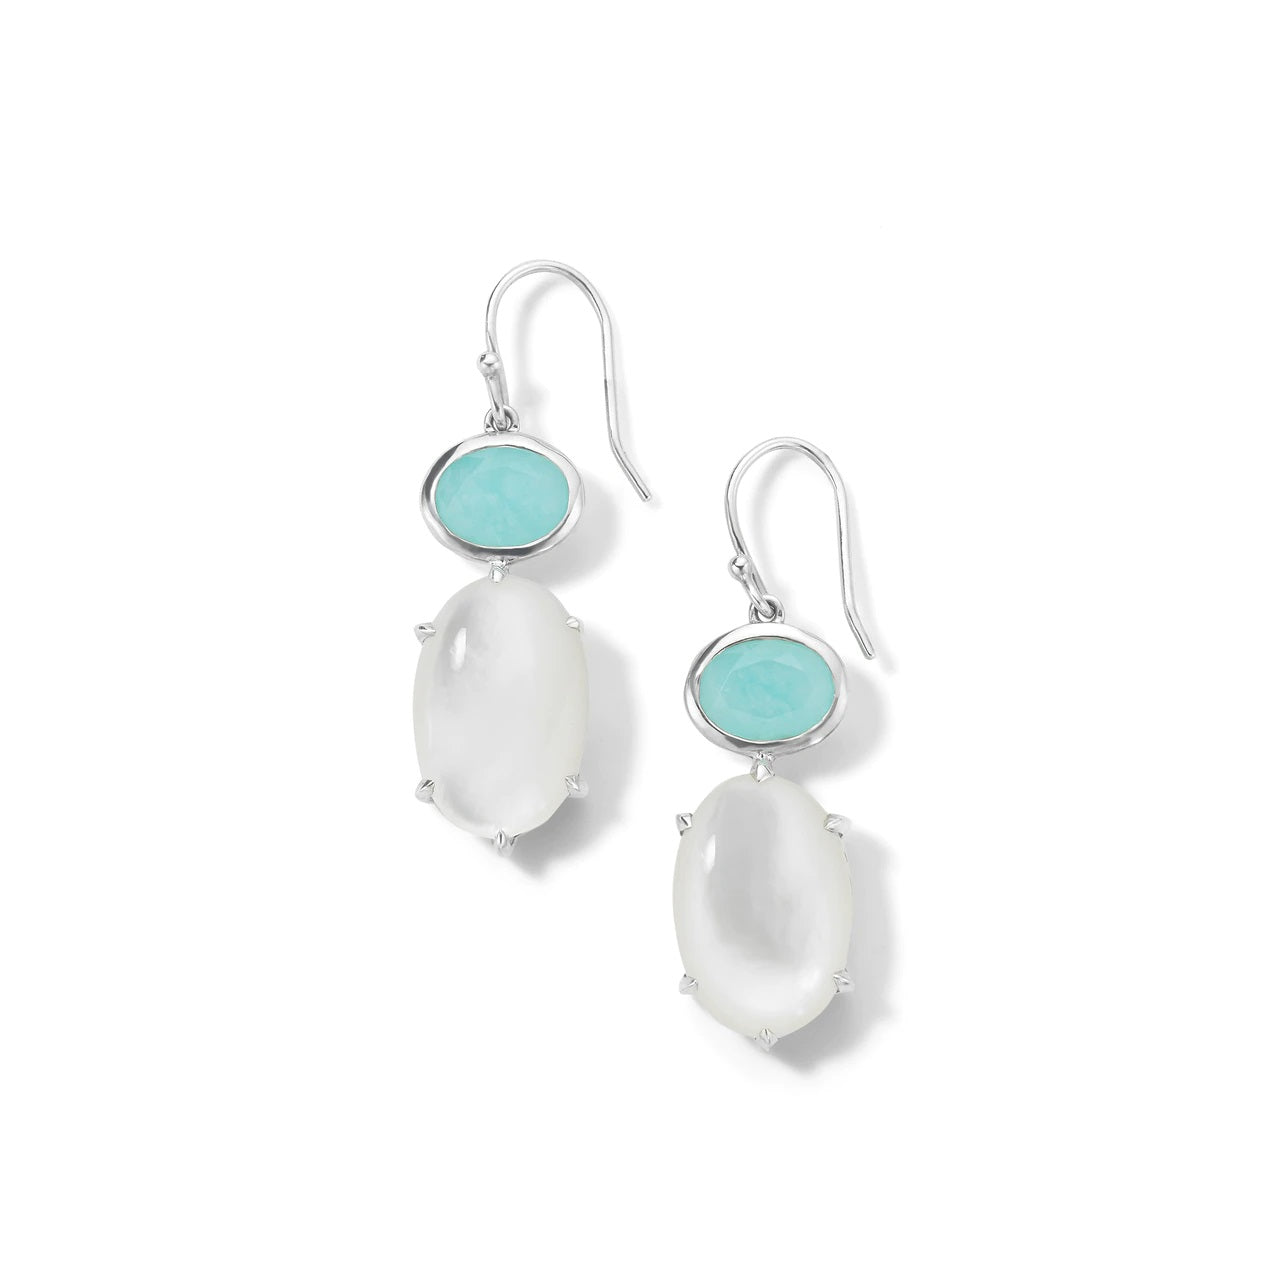 IPPOLITA Luce Sterling Silver Rock Candy Gemstone Dangle Earrings in Amazonite, Rock Crystal, and Mother-of-Pearl